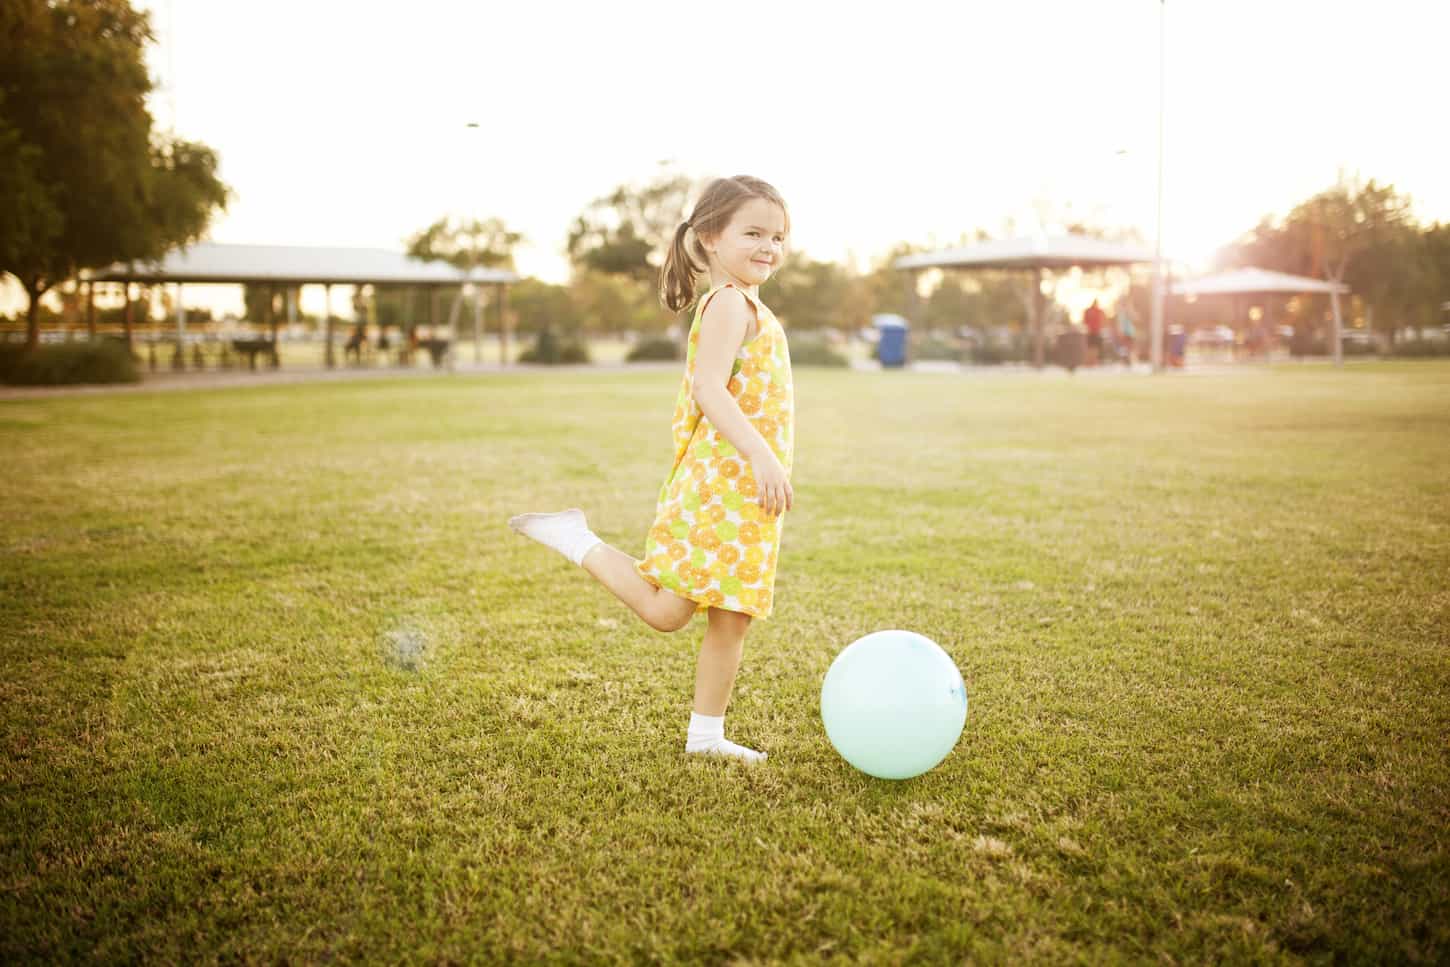 An image of a Girl kicking a ball at the park.